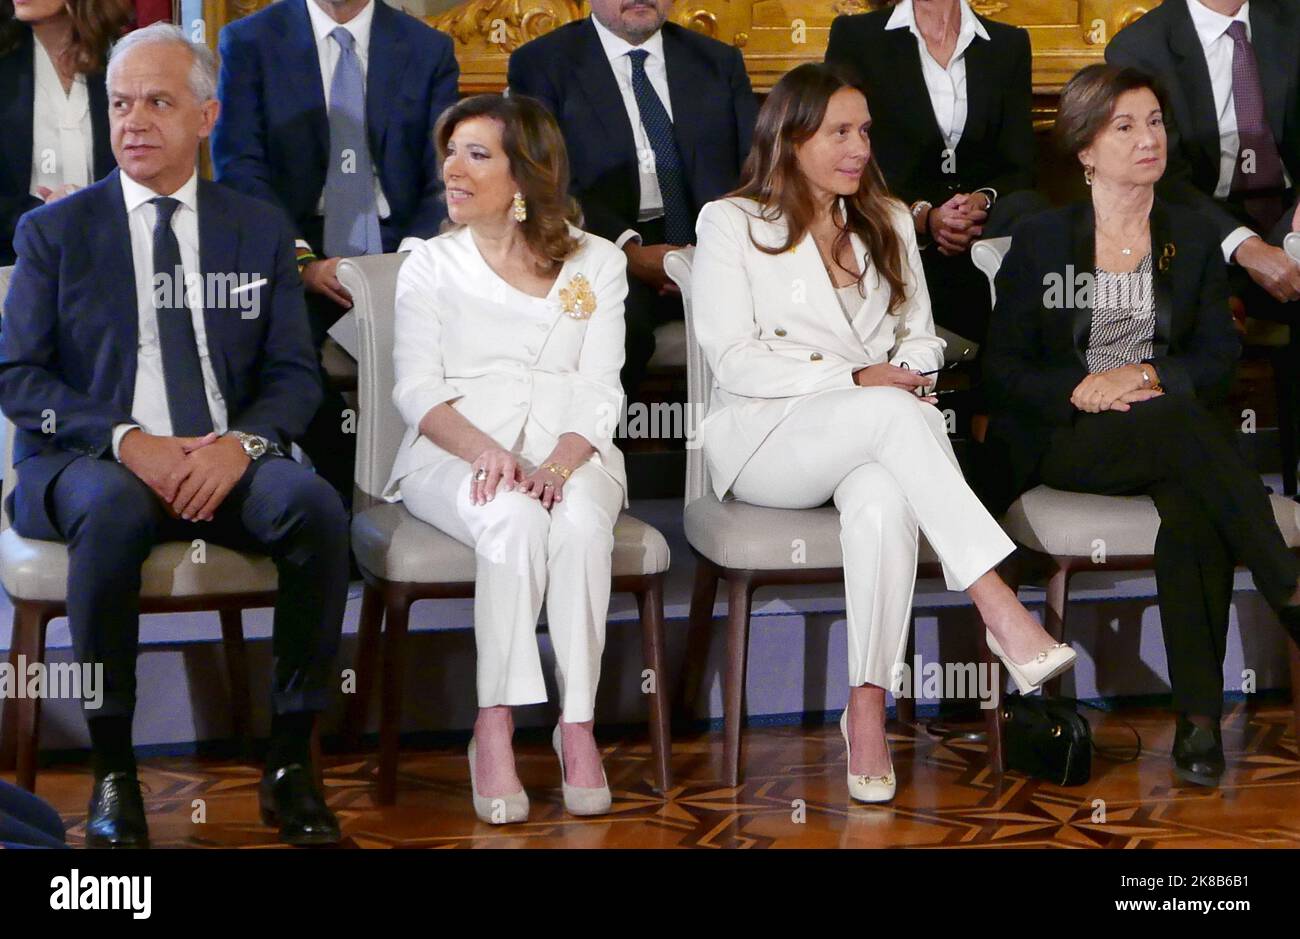 Rome, Italy. 22nd Oct, 2022. New Italian Ministers are going to swear the oath of Loyalty to the Italian Republic in Salone delle Feste at Palazzo del Quirinale, Rome, Italy, October 22 2022. From left to right, Matteo Piantedosi (Interior Minister) Elisabetta Casellati (Minister for Reforms) Alessandra Locatelli (Minister for Disabilities) Eugenia Roccella (Minister for Family and Equality politics). (Photo by Elisa Gestri/SIPA USA) Credit: Sipa USA/Alamy Live News Stock Photo